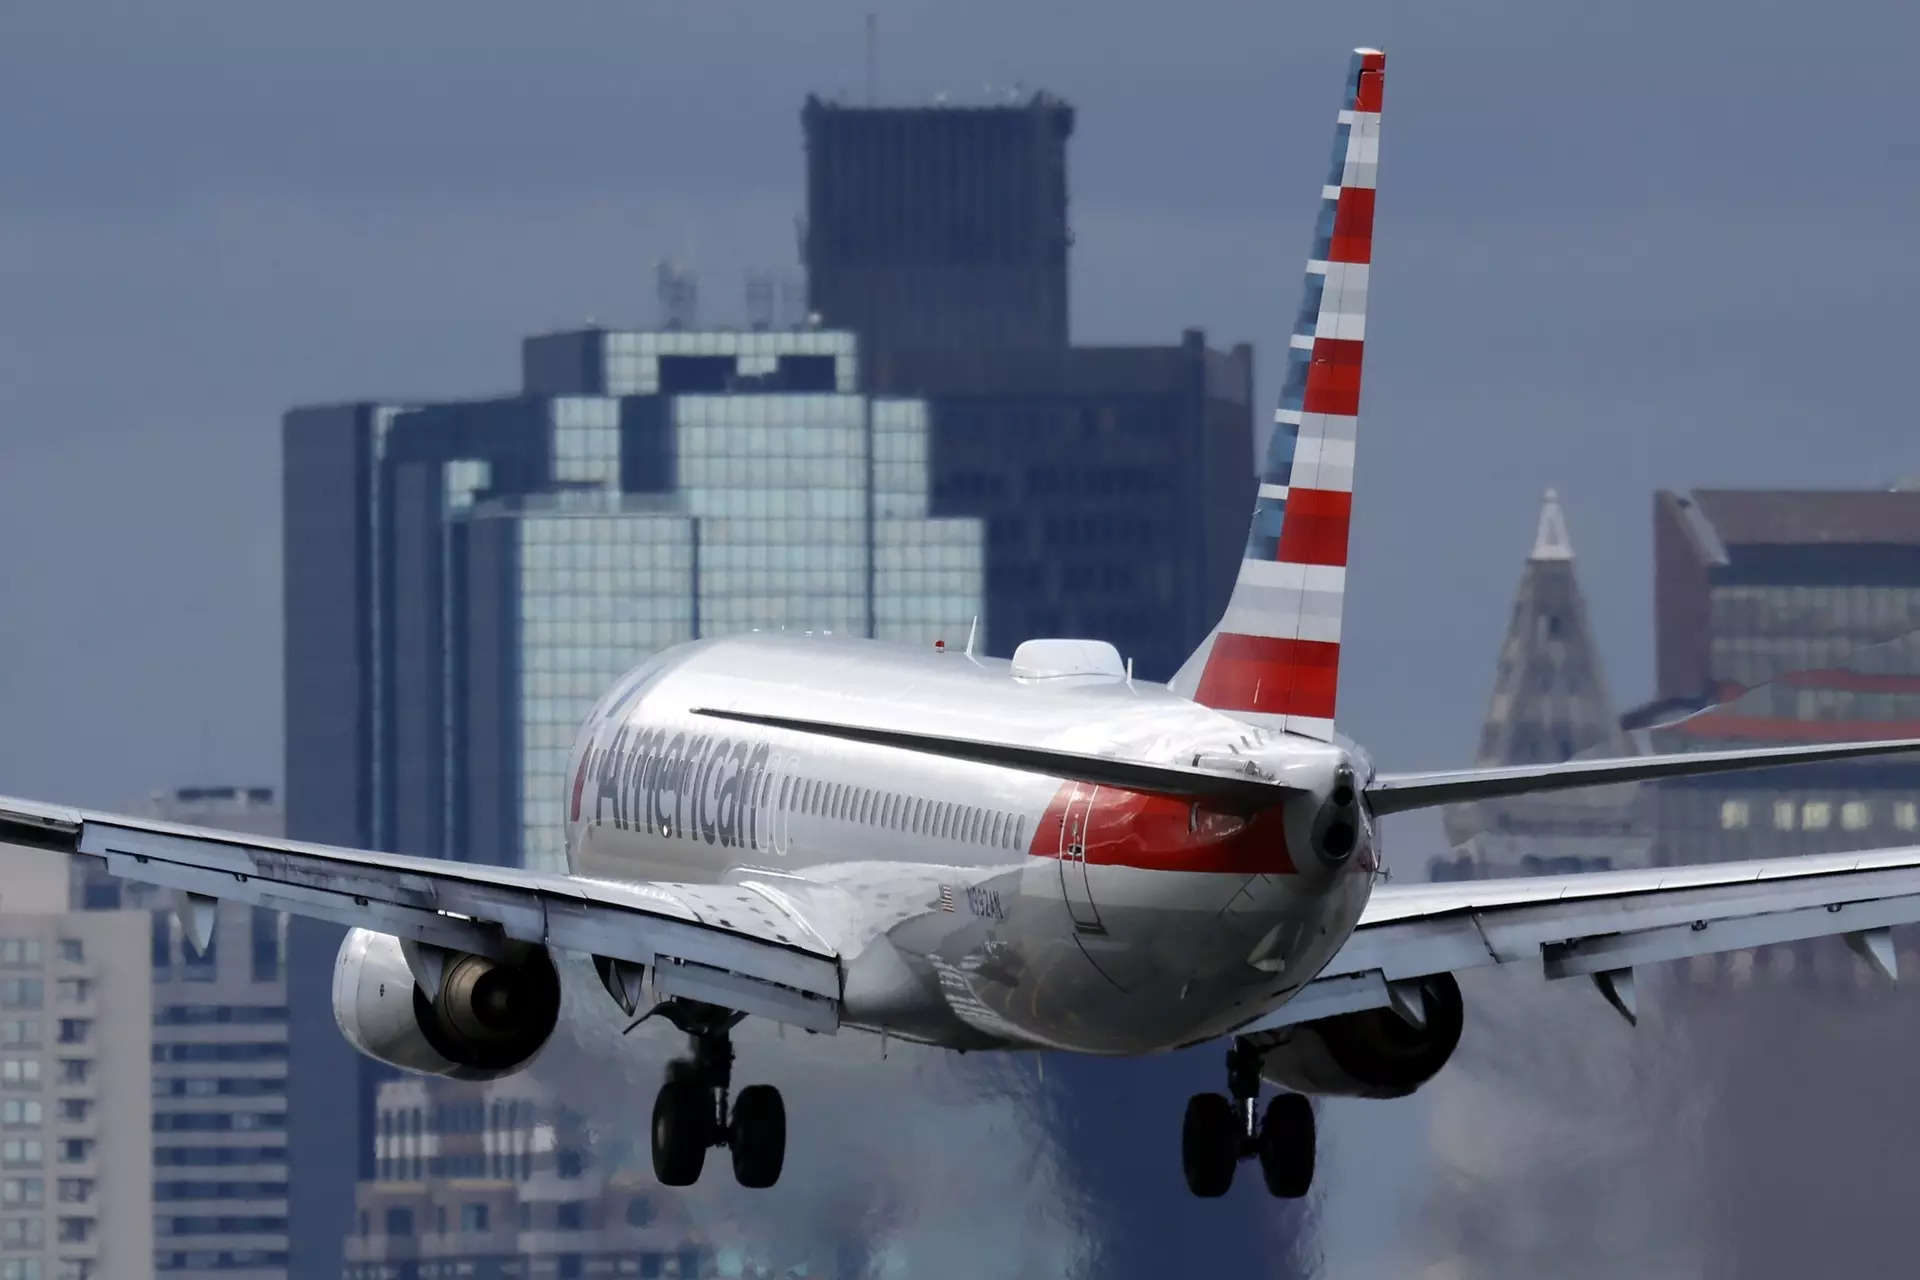 <p>FILE - An American Airlines plane lands at Logan International Airport, Thursday, Jan. 26, 2023, in Boston. American Airlines said Thursday, Aug. 17, 2023, that it will start flying to three new destinations in Europe next summer — Copenhagen, Naples and Nice, France. (AP Photo/Michael Dwyer, File)</p>